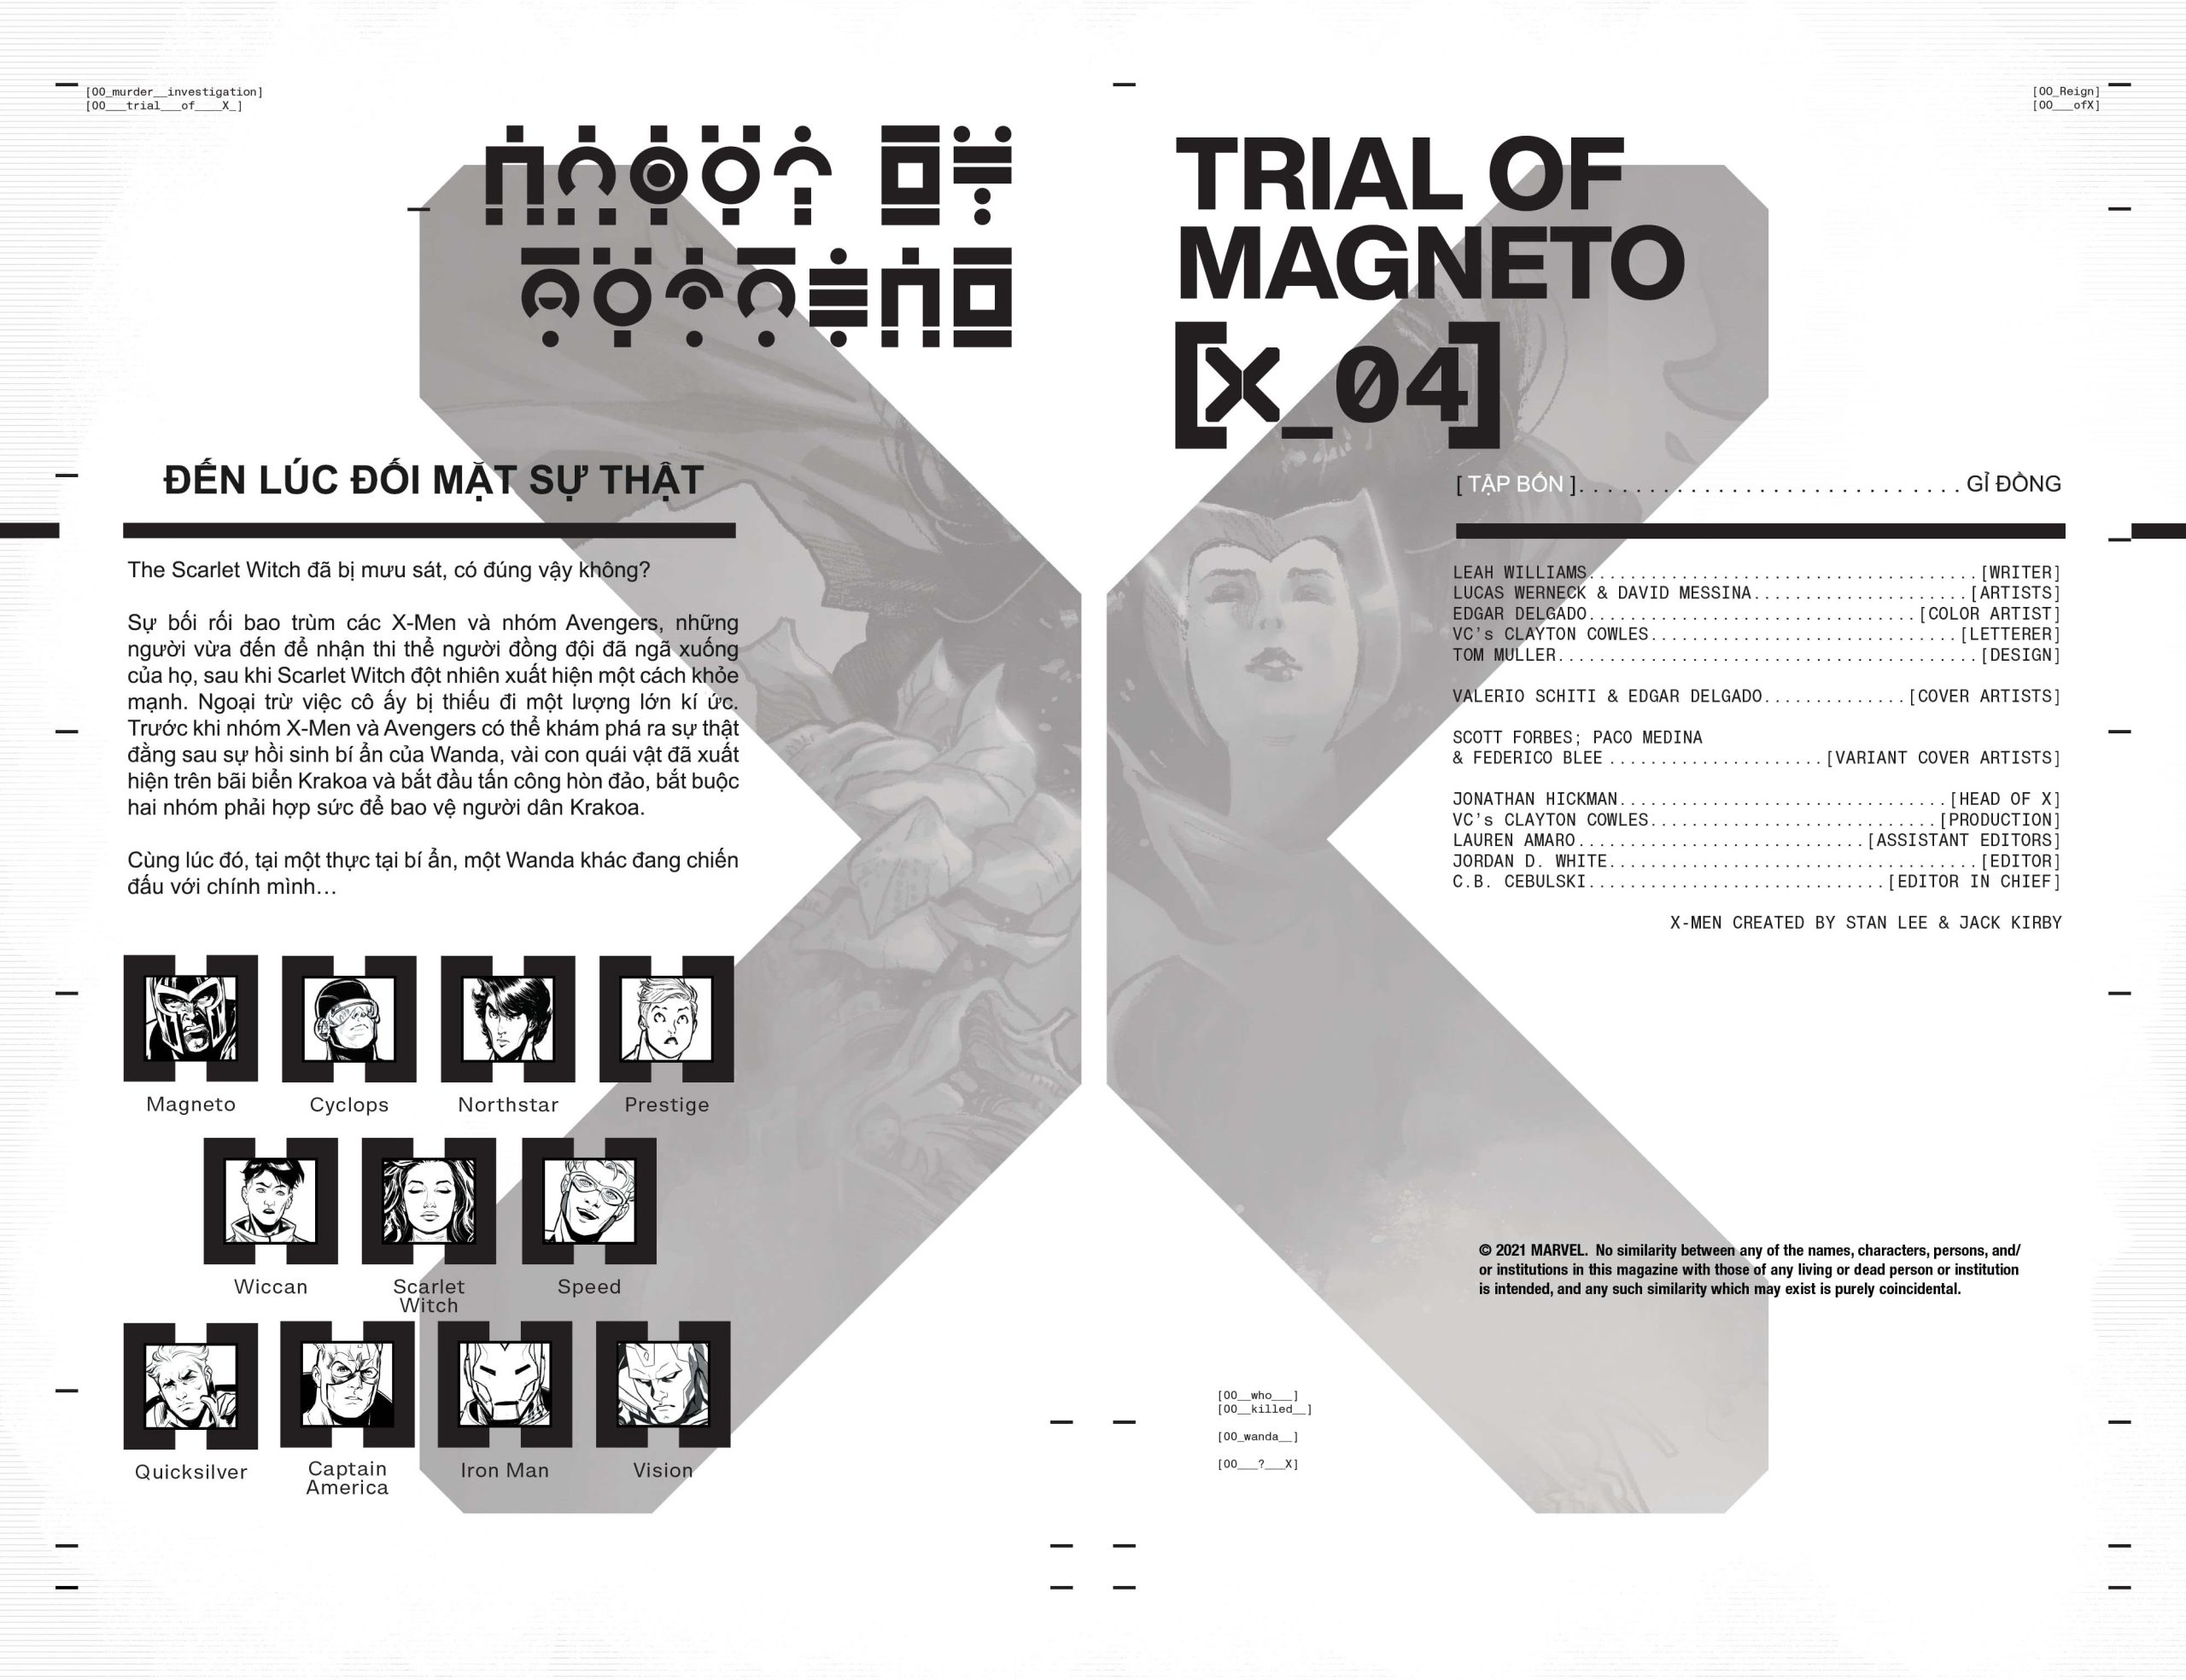 https://langgeek.net/wp-content/webpc-passthru.php?src=https://langgeek.net/wp-content/uploads/2022/04/X-Men-The-Trial-Of-Magneto-2021-04-of-05-005-scaled.jpg&nocache=1